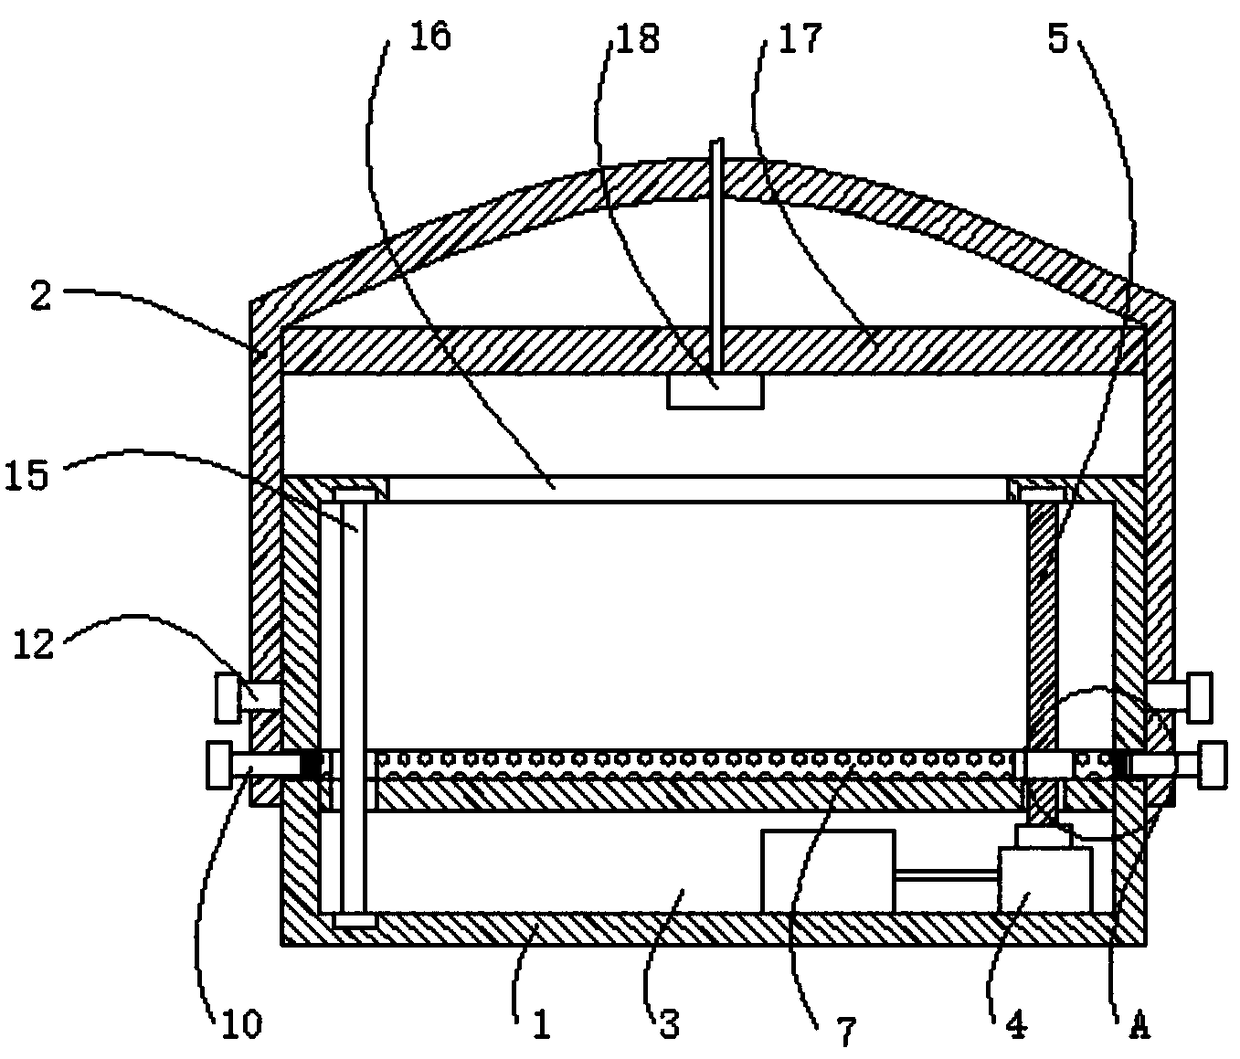 Feeding cage egg collecting device for poultry breeding